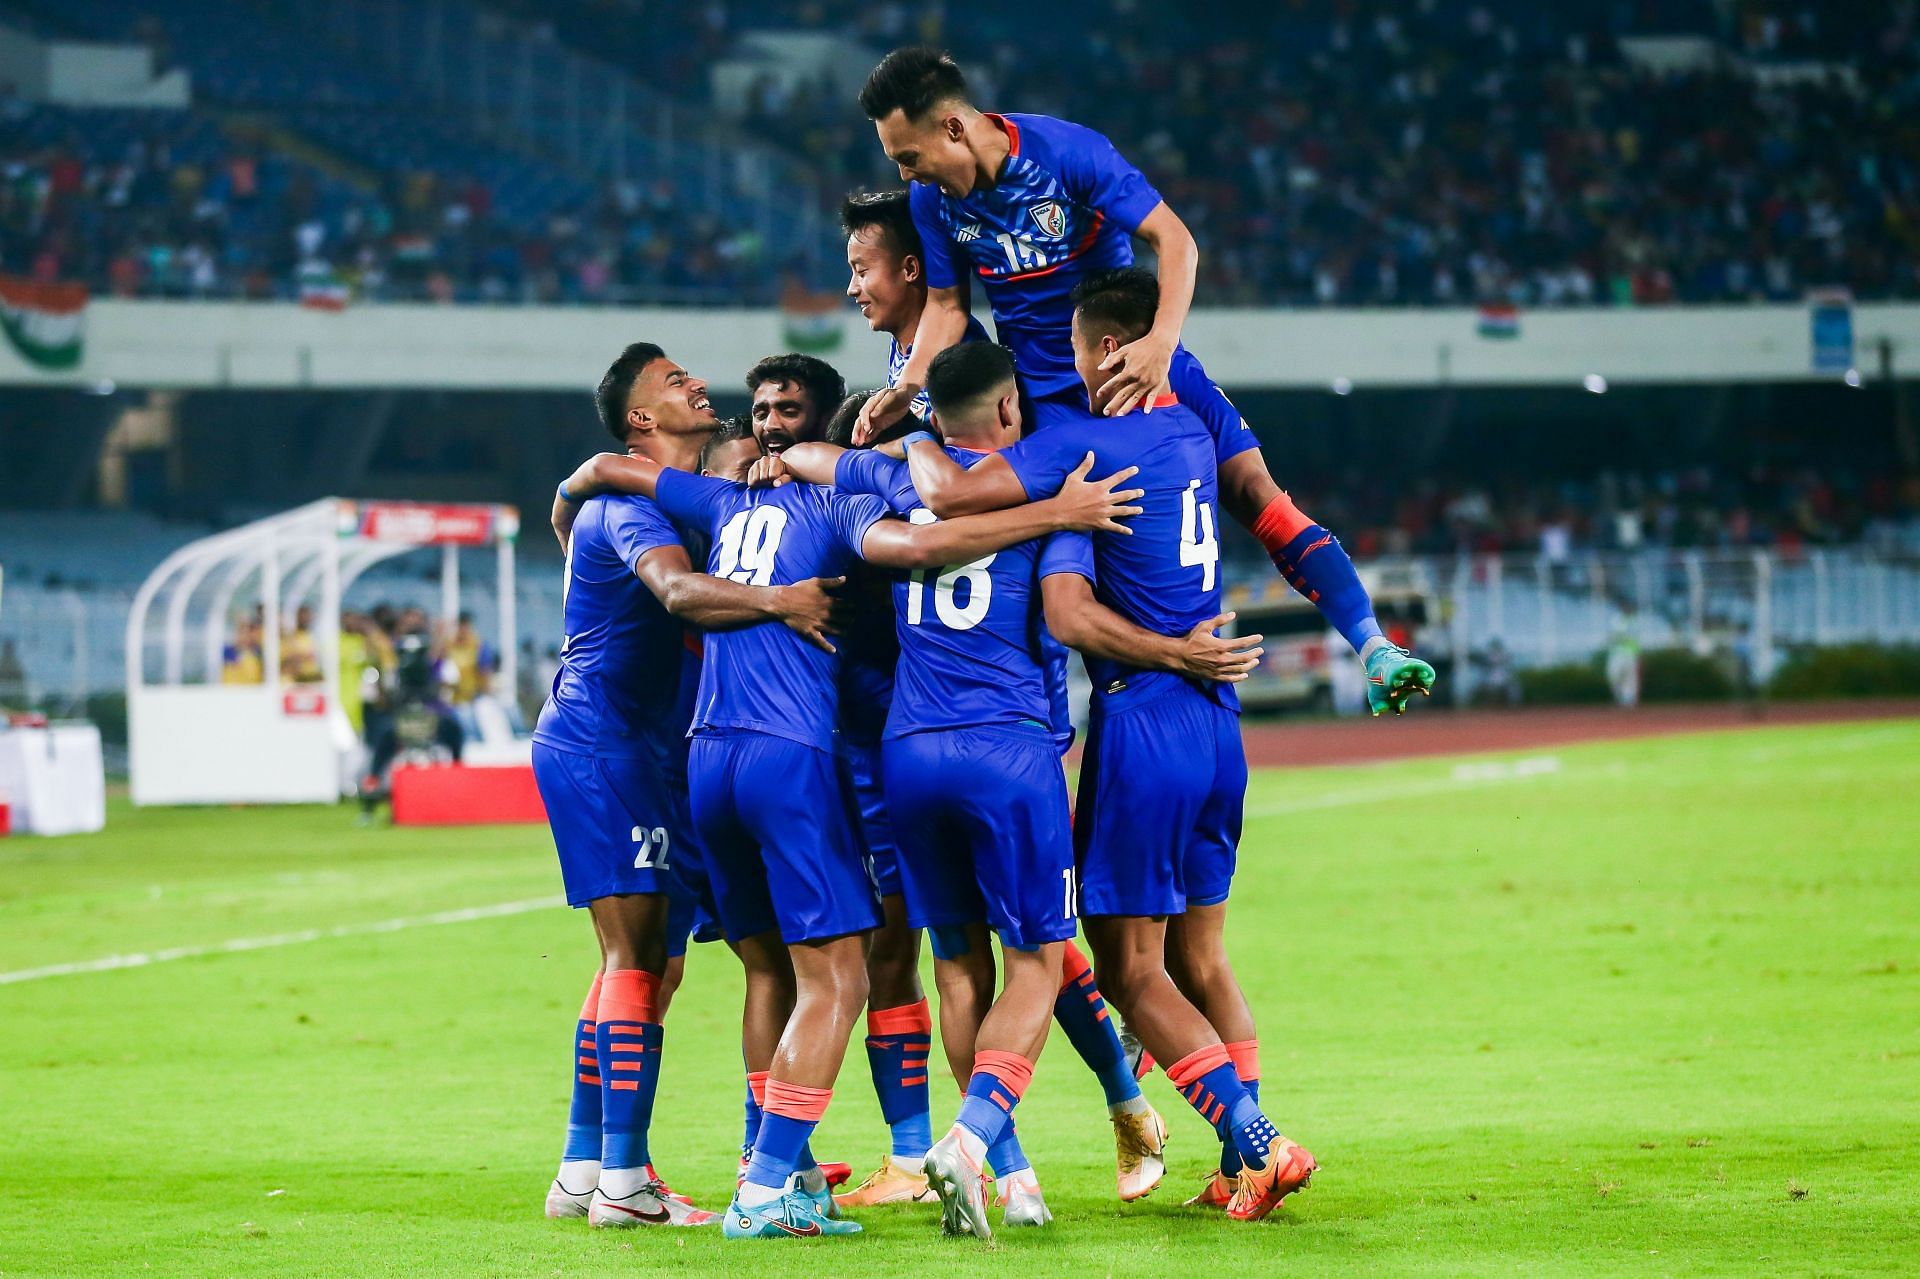 Indian national team players celebrating a goal against Hong Kong in the final game of the AFC Asian Cup qualifiers (Image Courtesy: AIFF Media)